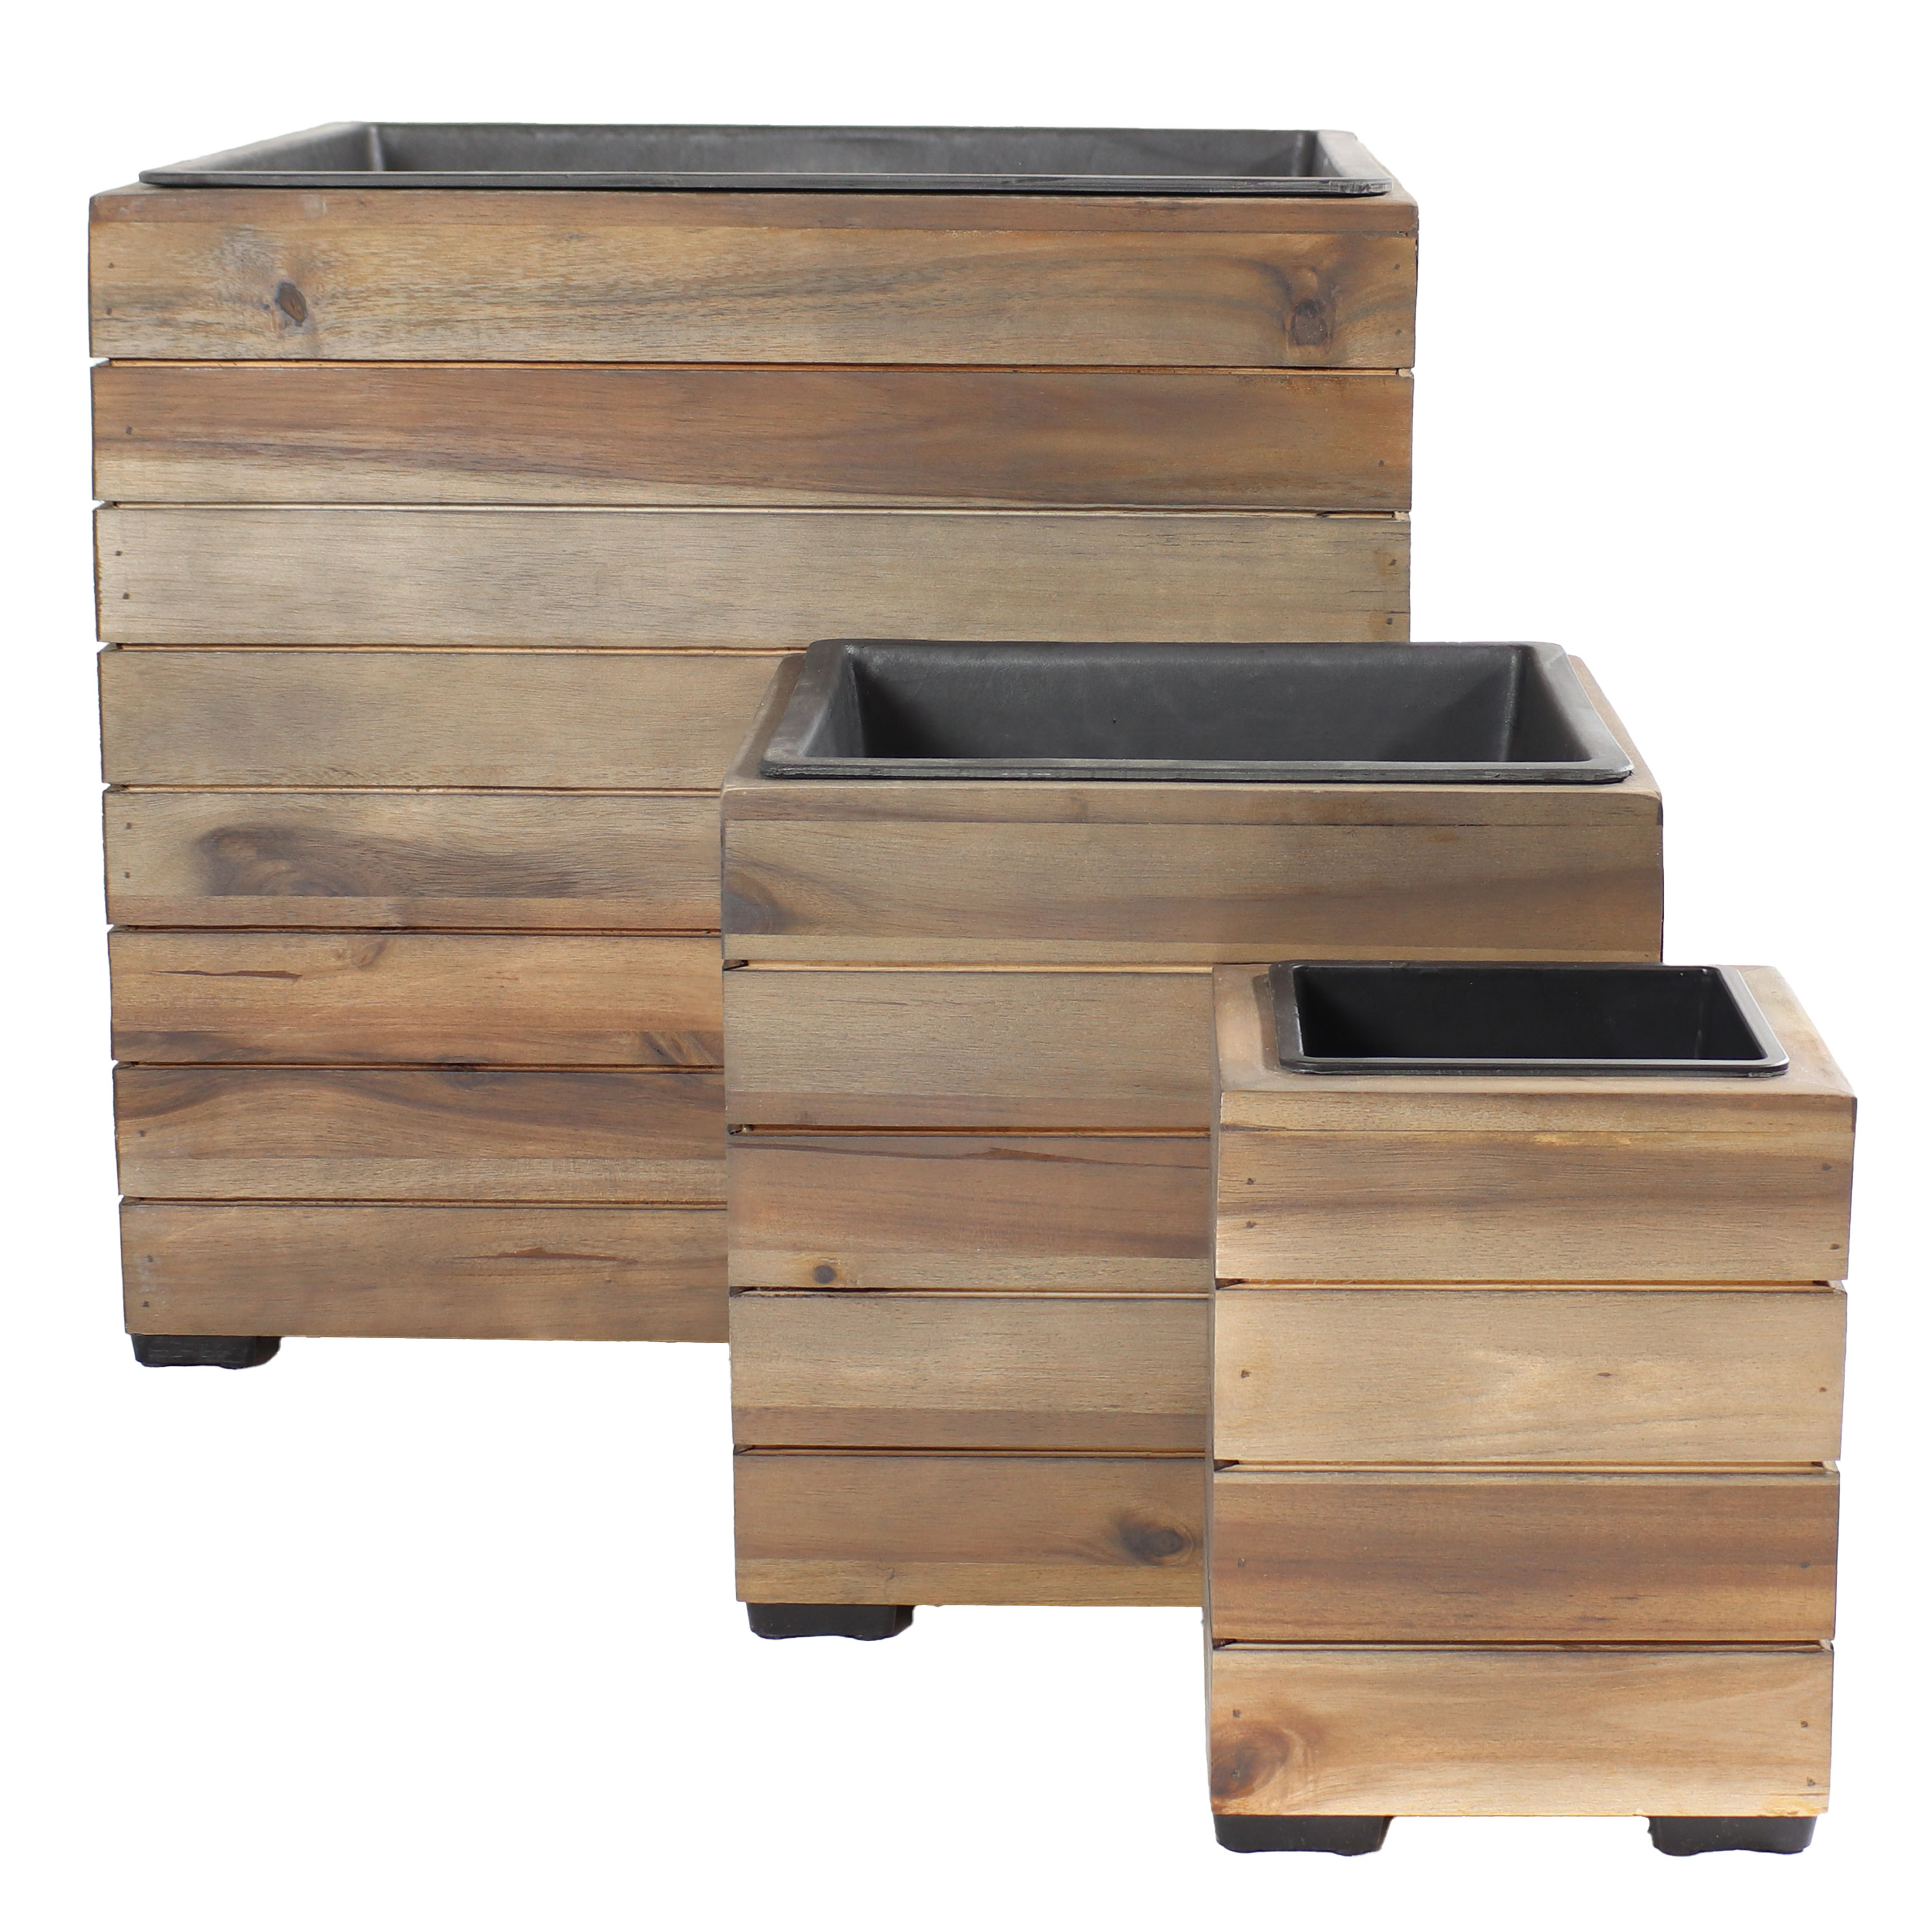 3-Piece Square Wood Planter Box with Liner - Anthracite